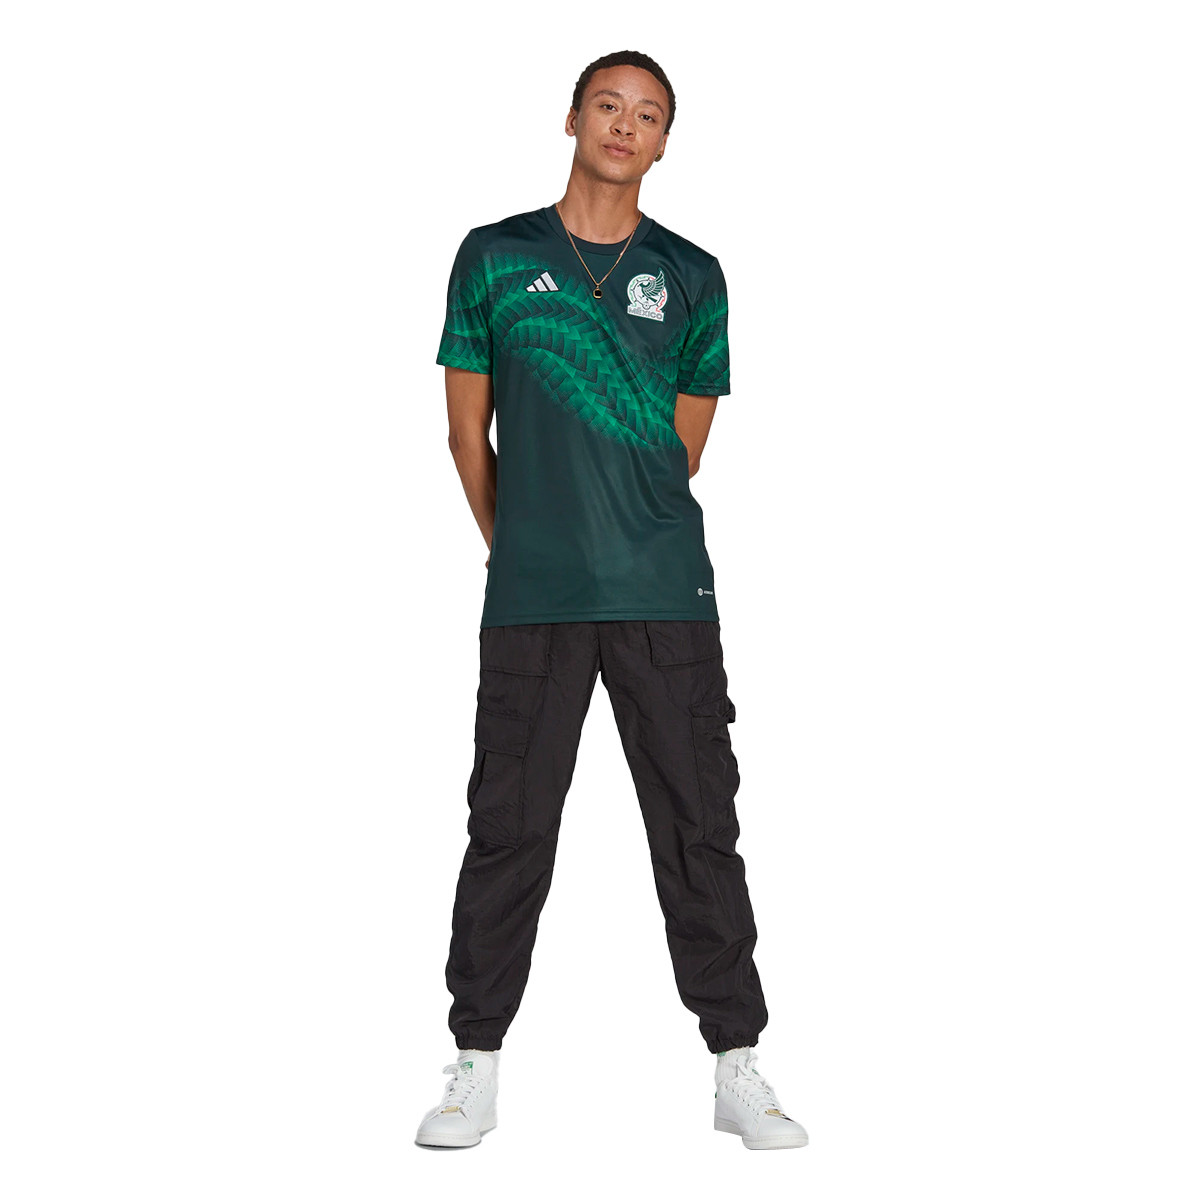 mundial 2022 mexico jersey